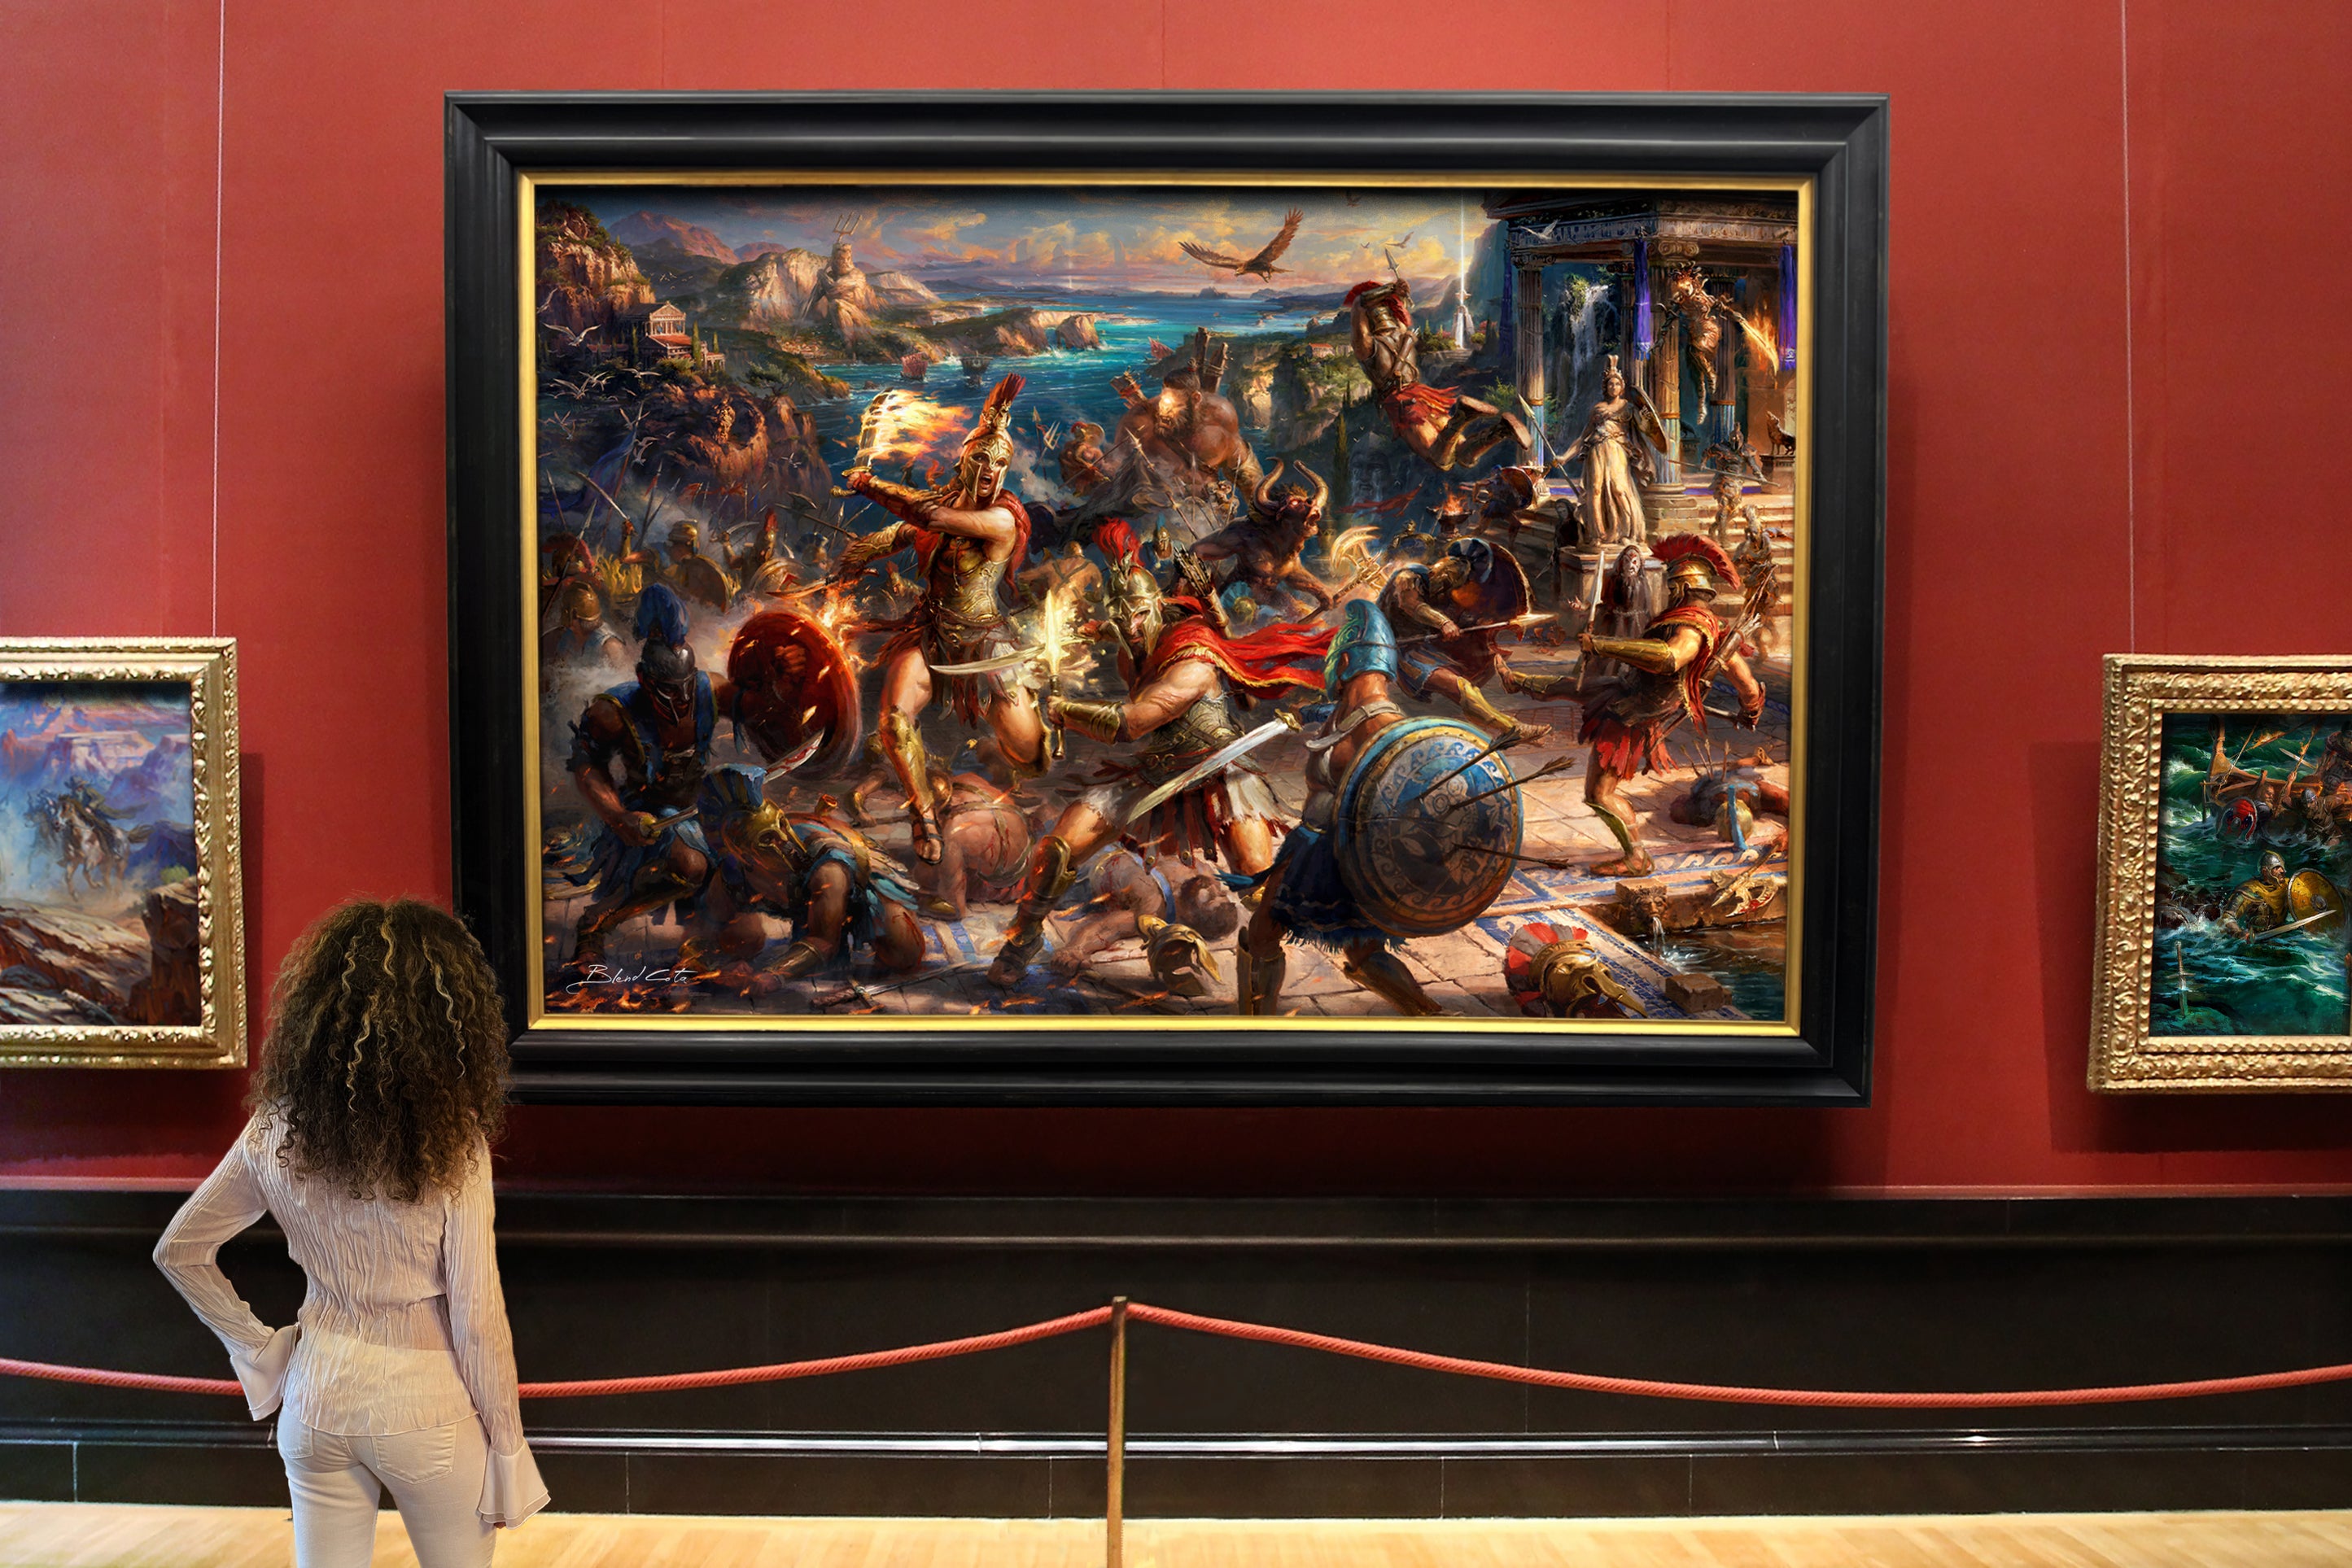 A battle of mythological creatures and Spartan warriors,  from Ubisoft's Assassin's Creed Odyssey with Kassandra and Alexios fighting by a temple in this original oil on canvas painting in a black and gold frame, pictured in an art gallery room setting.